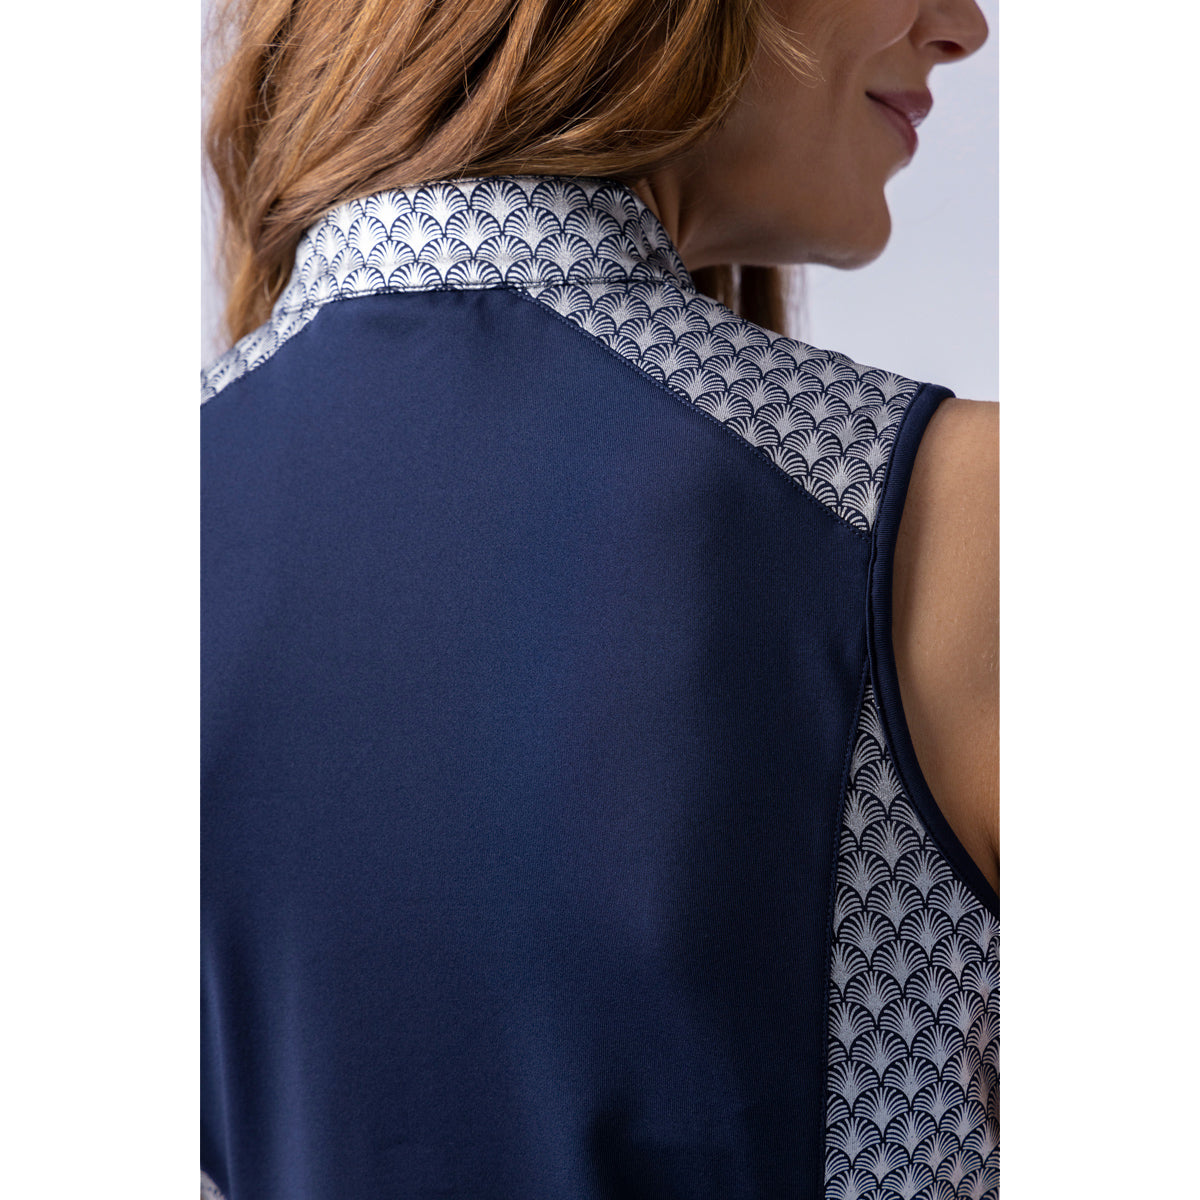 Glenmuir Ladies Sleeveless Polo with Contrast Fan Print Panels in Navy Blue & Silver Foil